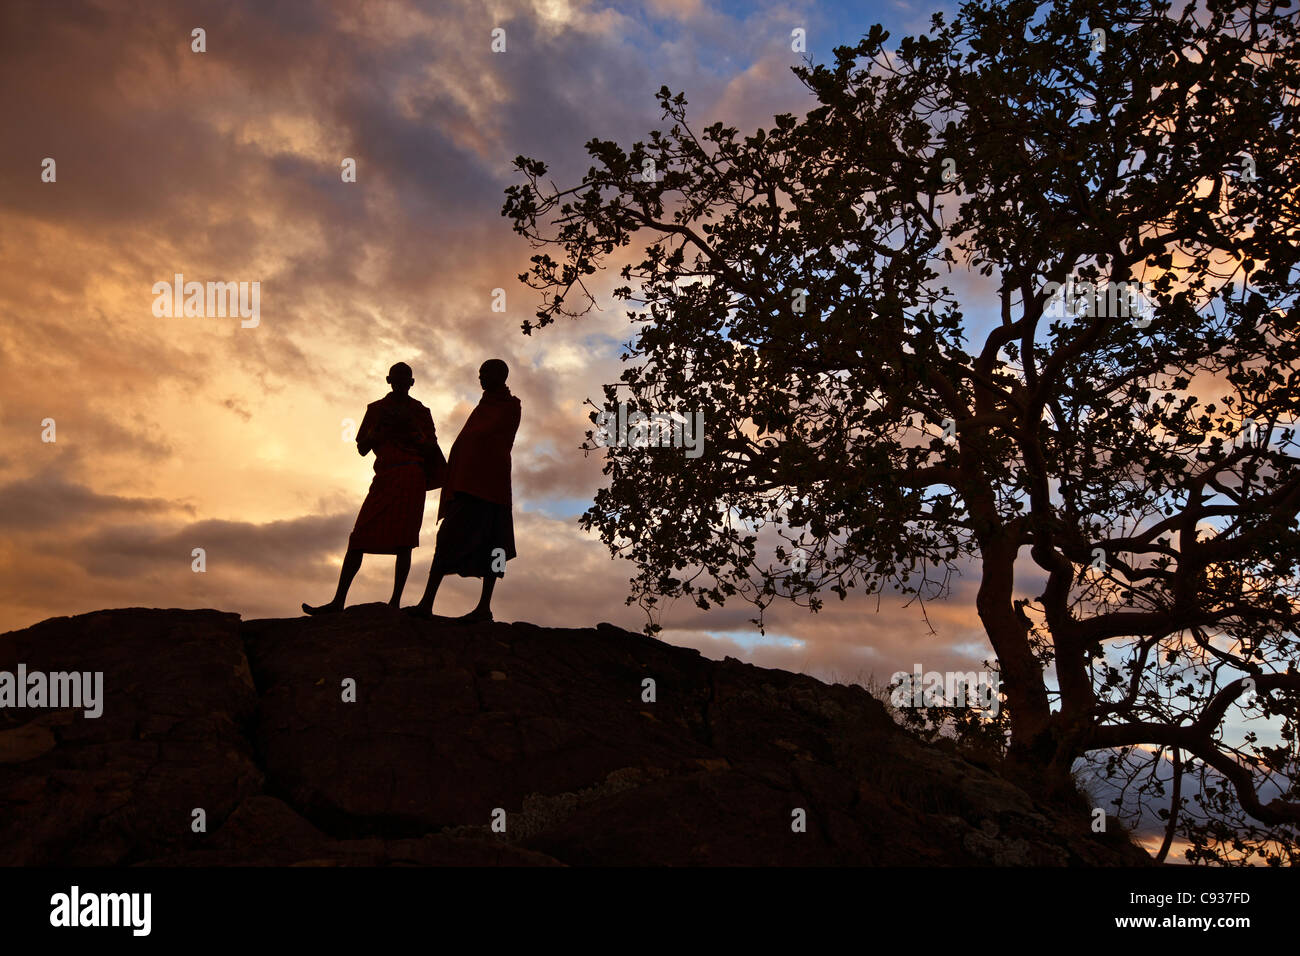 Two Maasai men silhouetted on a hill at sunset. Stock Photo